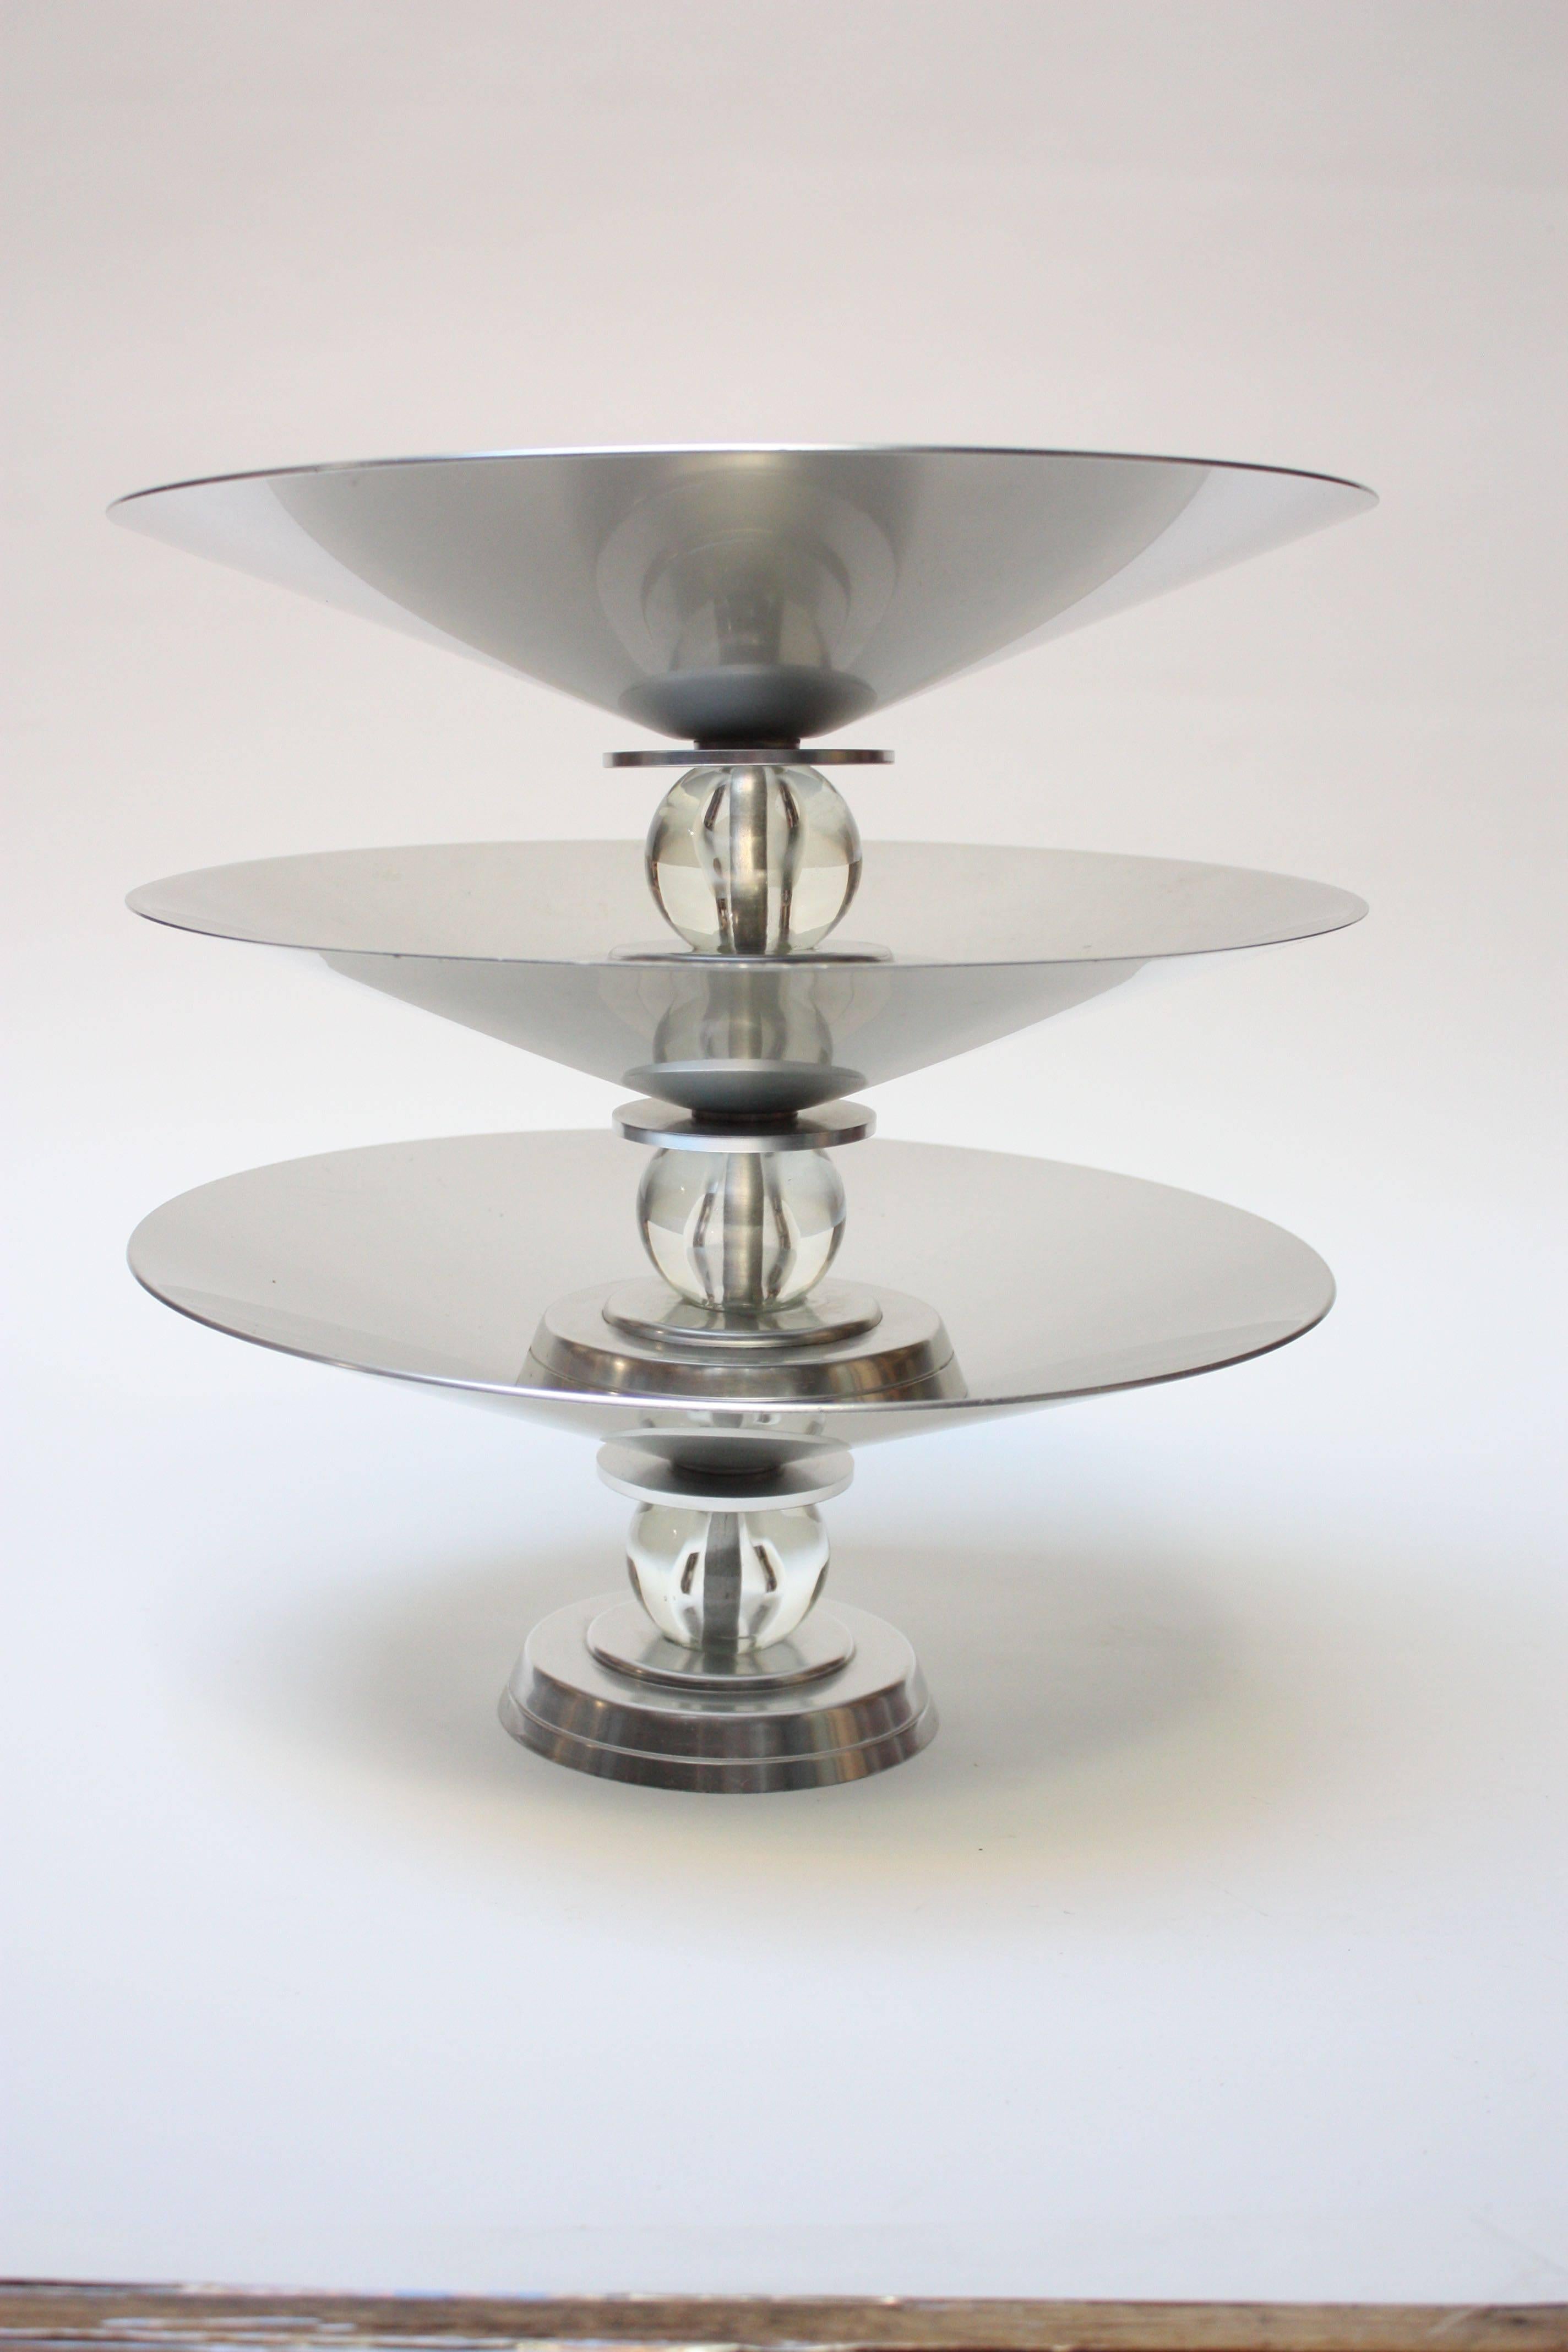 Nice set of three Art Deco aluminum compotes from the 'Stratford' series (Model 7411), conceived and designed by Lurelle Guild for Kensington in 1934. Only in production until the end of WWII. Aluminum foot and top are separated by a glass 'orb'